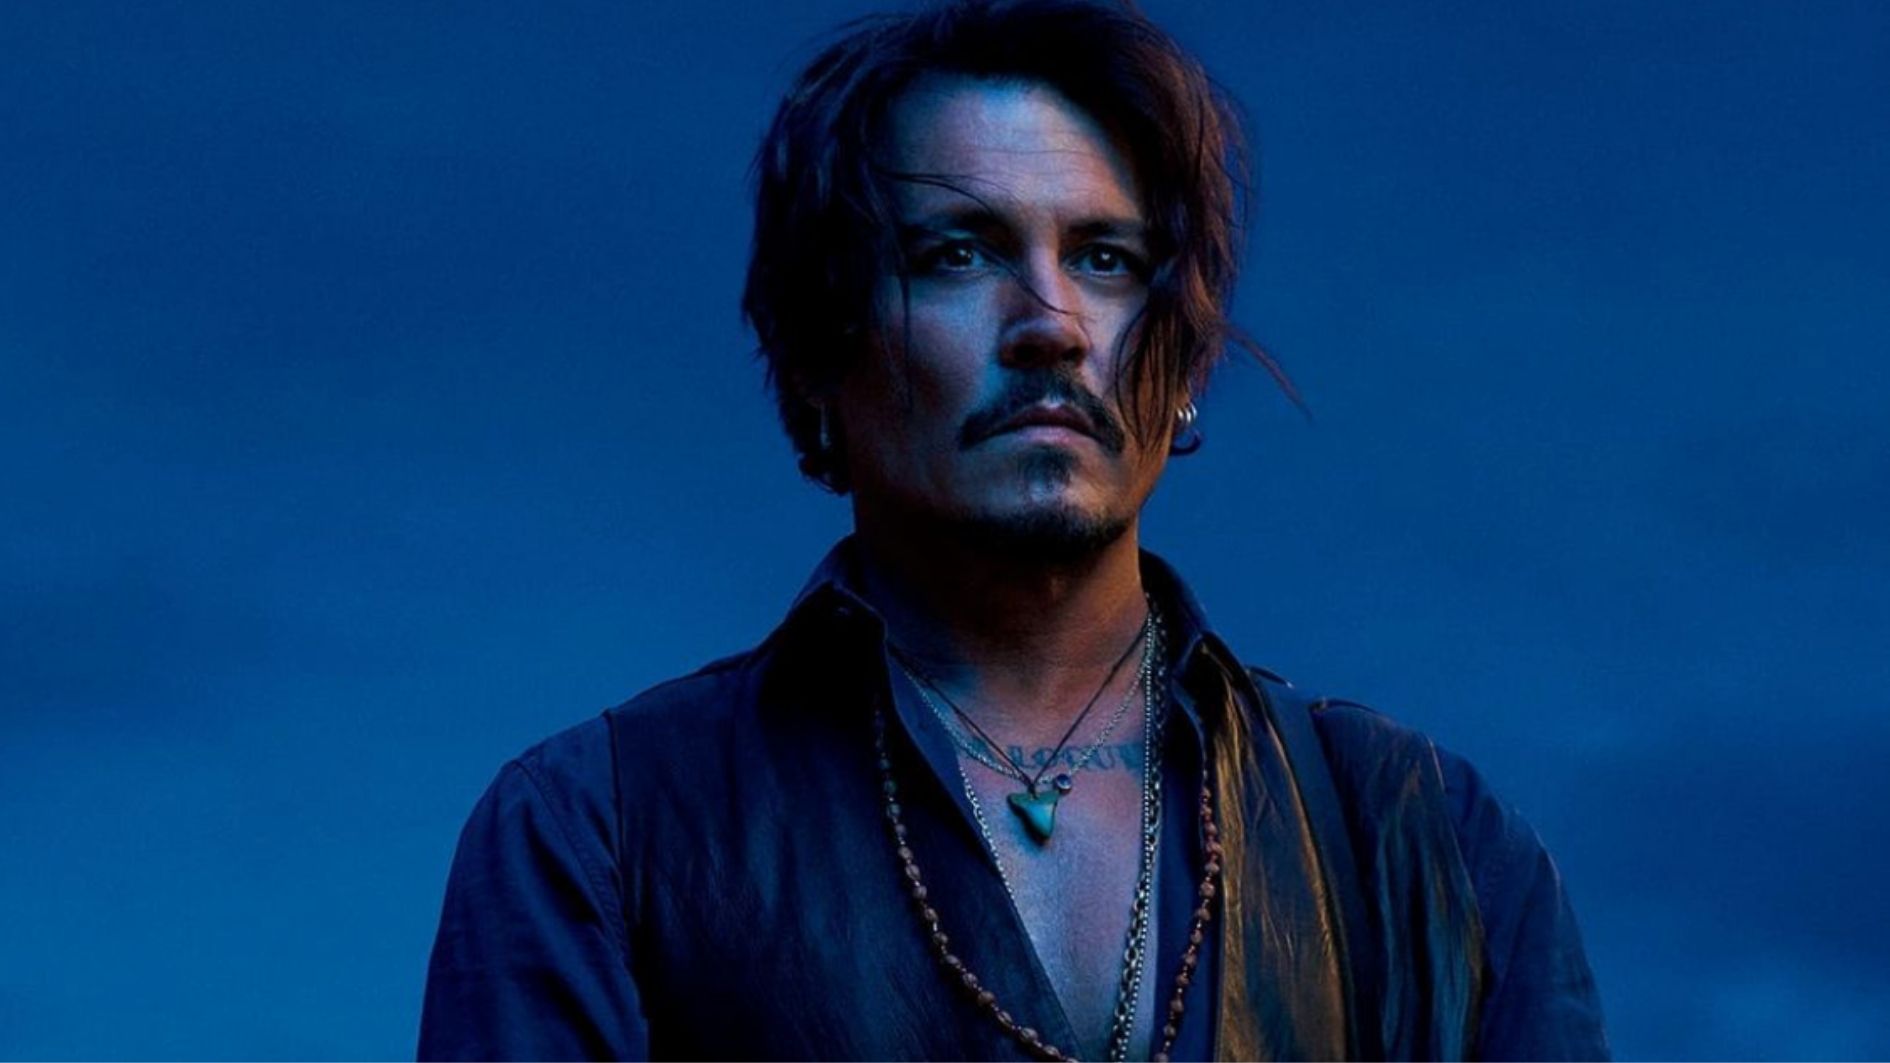 Johnny Depp signs million-dollar contract after Amber Heard lawsuit